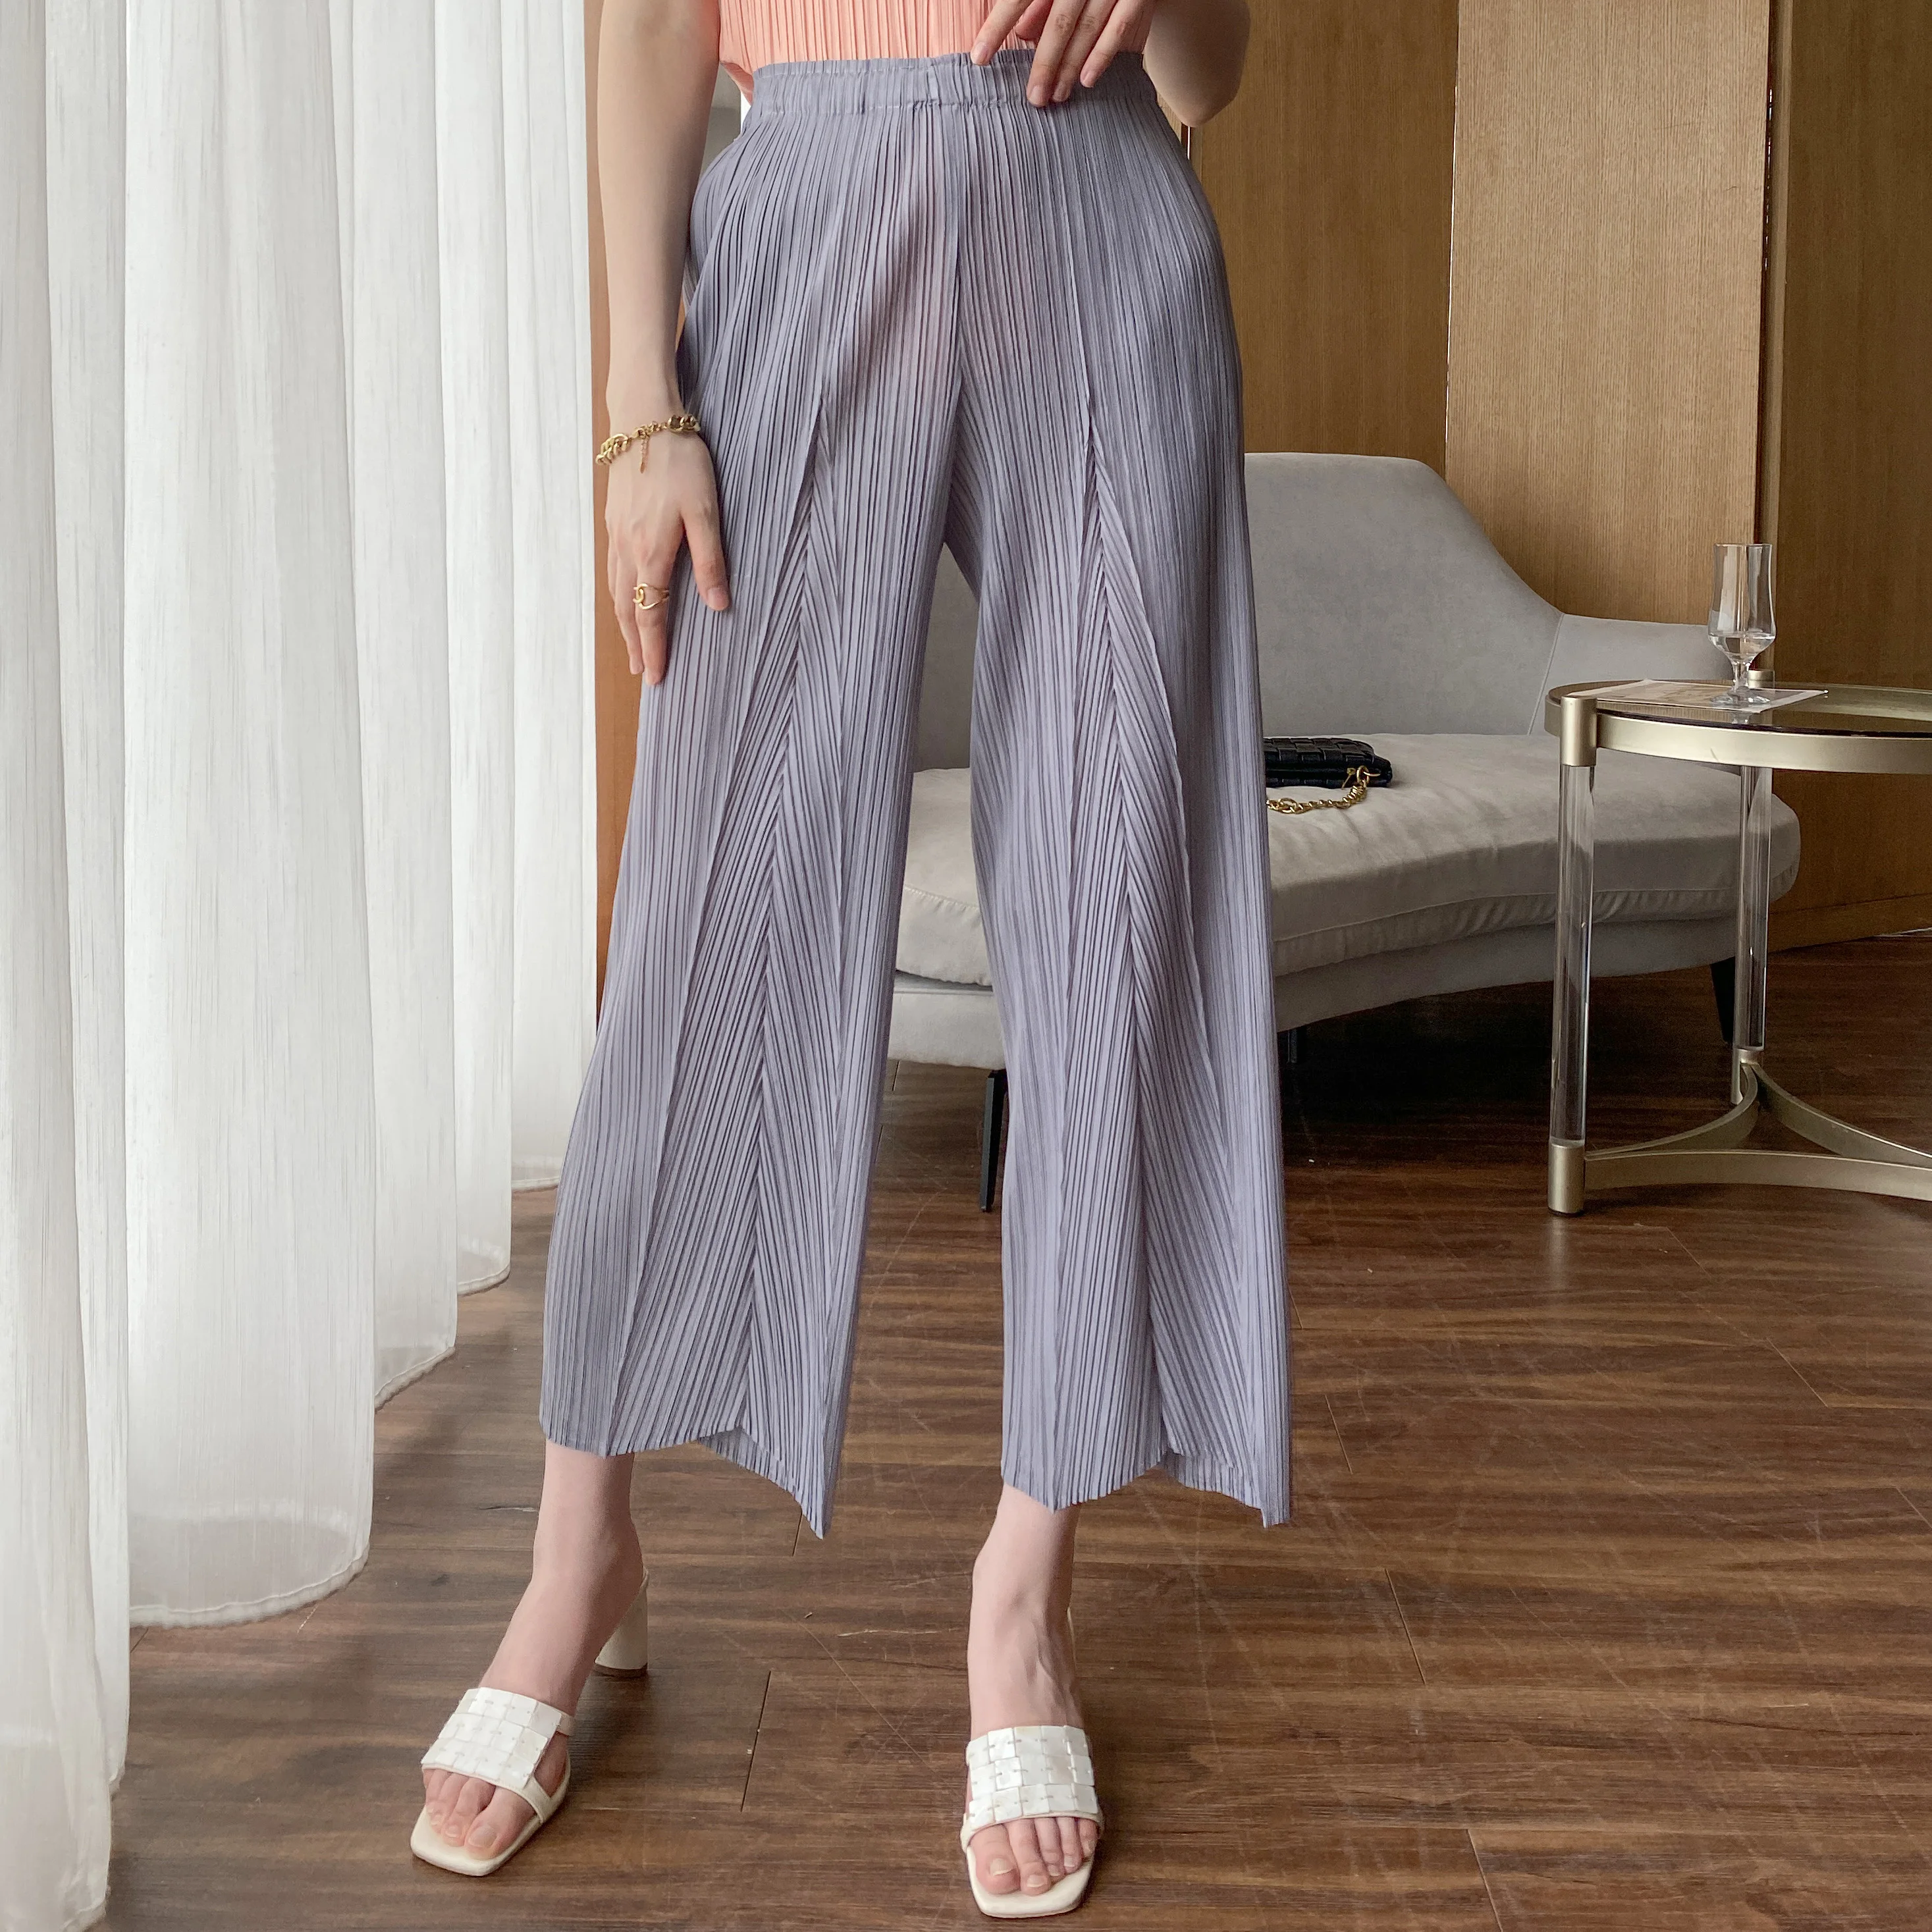 Autumn, spring and summer three seasons can wear Miyake pleated fashion temperament versatile casual fashion nine-minute pants straight jeans men loose spring and fall new fashion trend casual nine minute pants high street wide leg pants baggy jeans